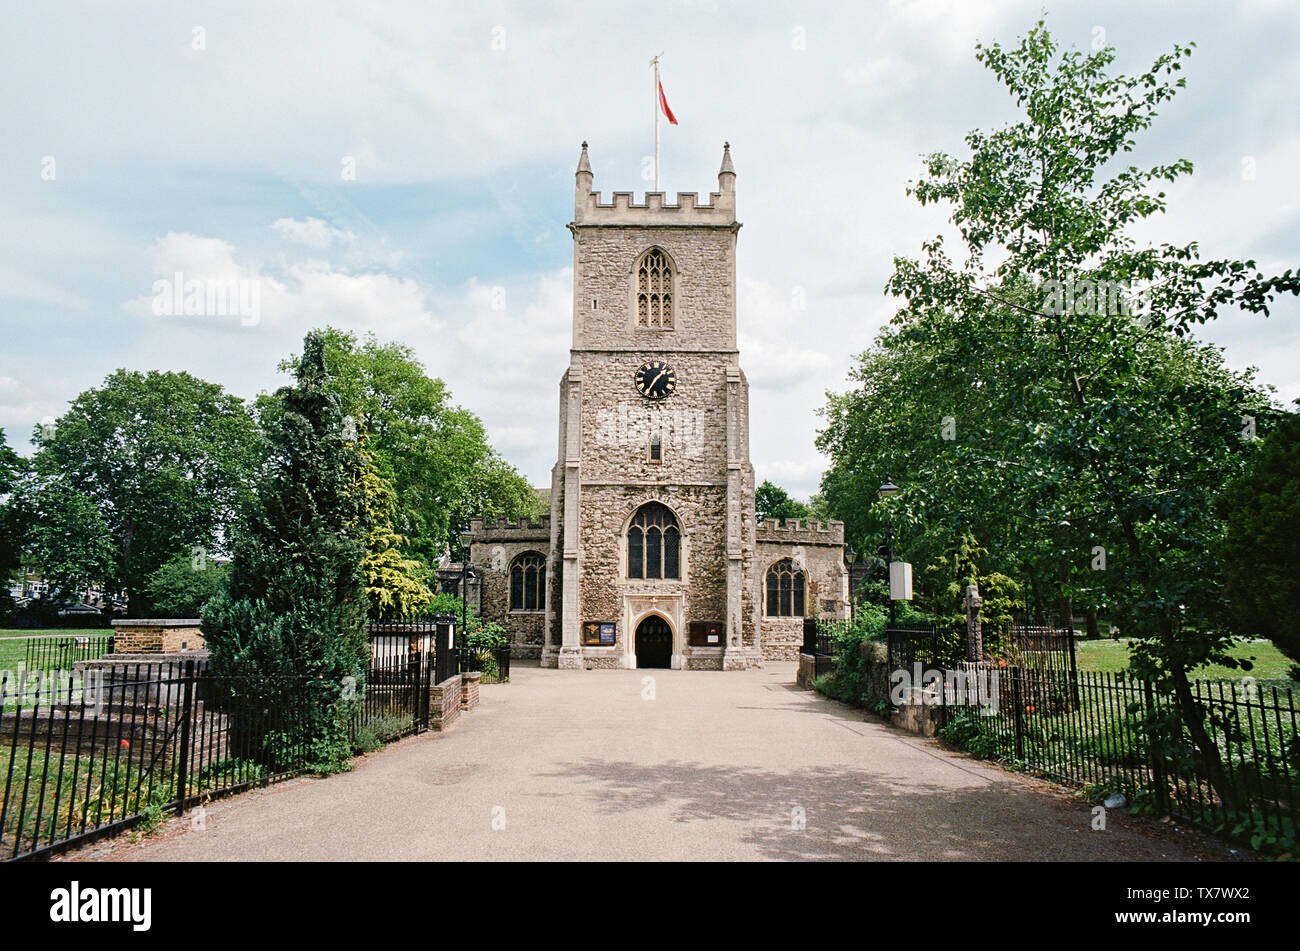 The historic church of St Dunstan, Stepney, in London's East End, UK Stock Photo